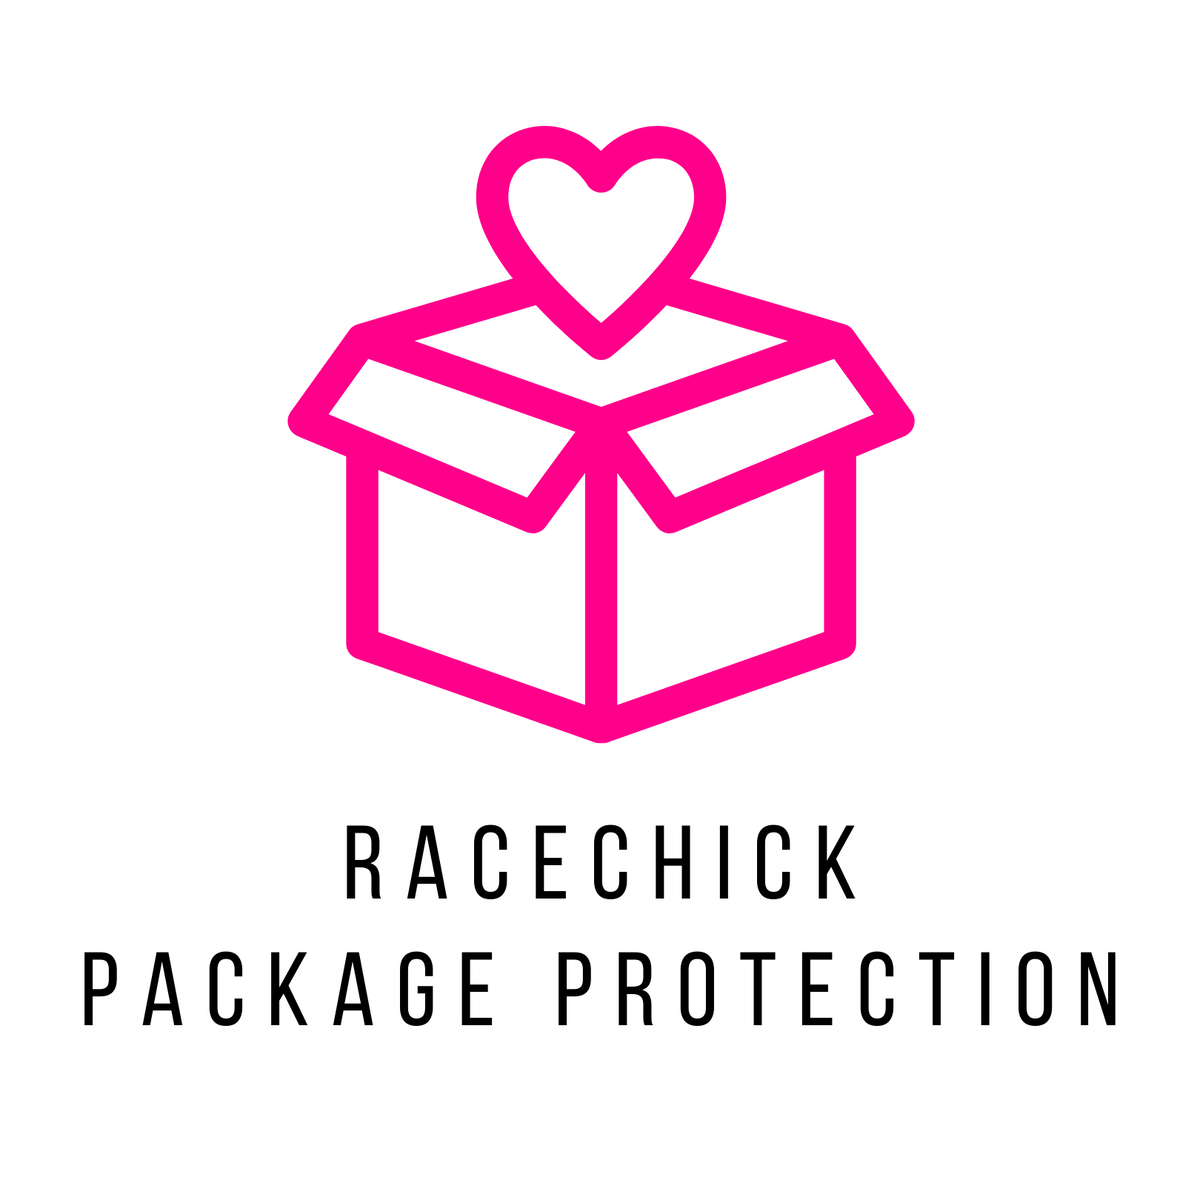 Package Protection